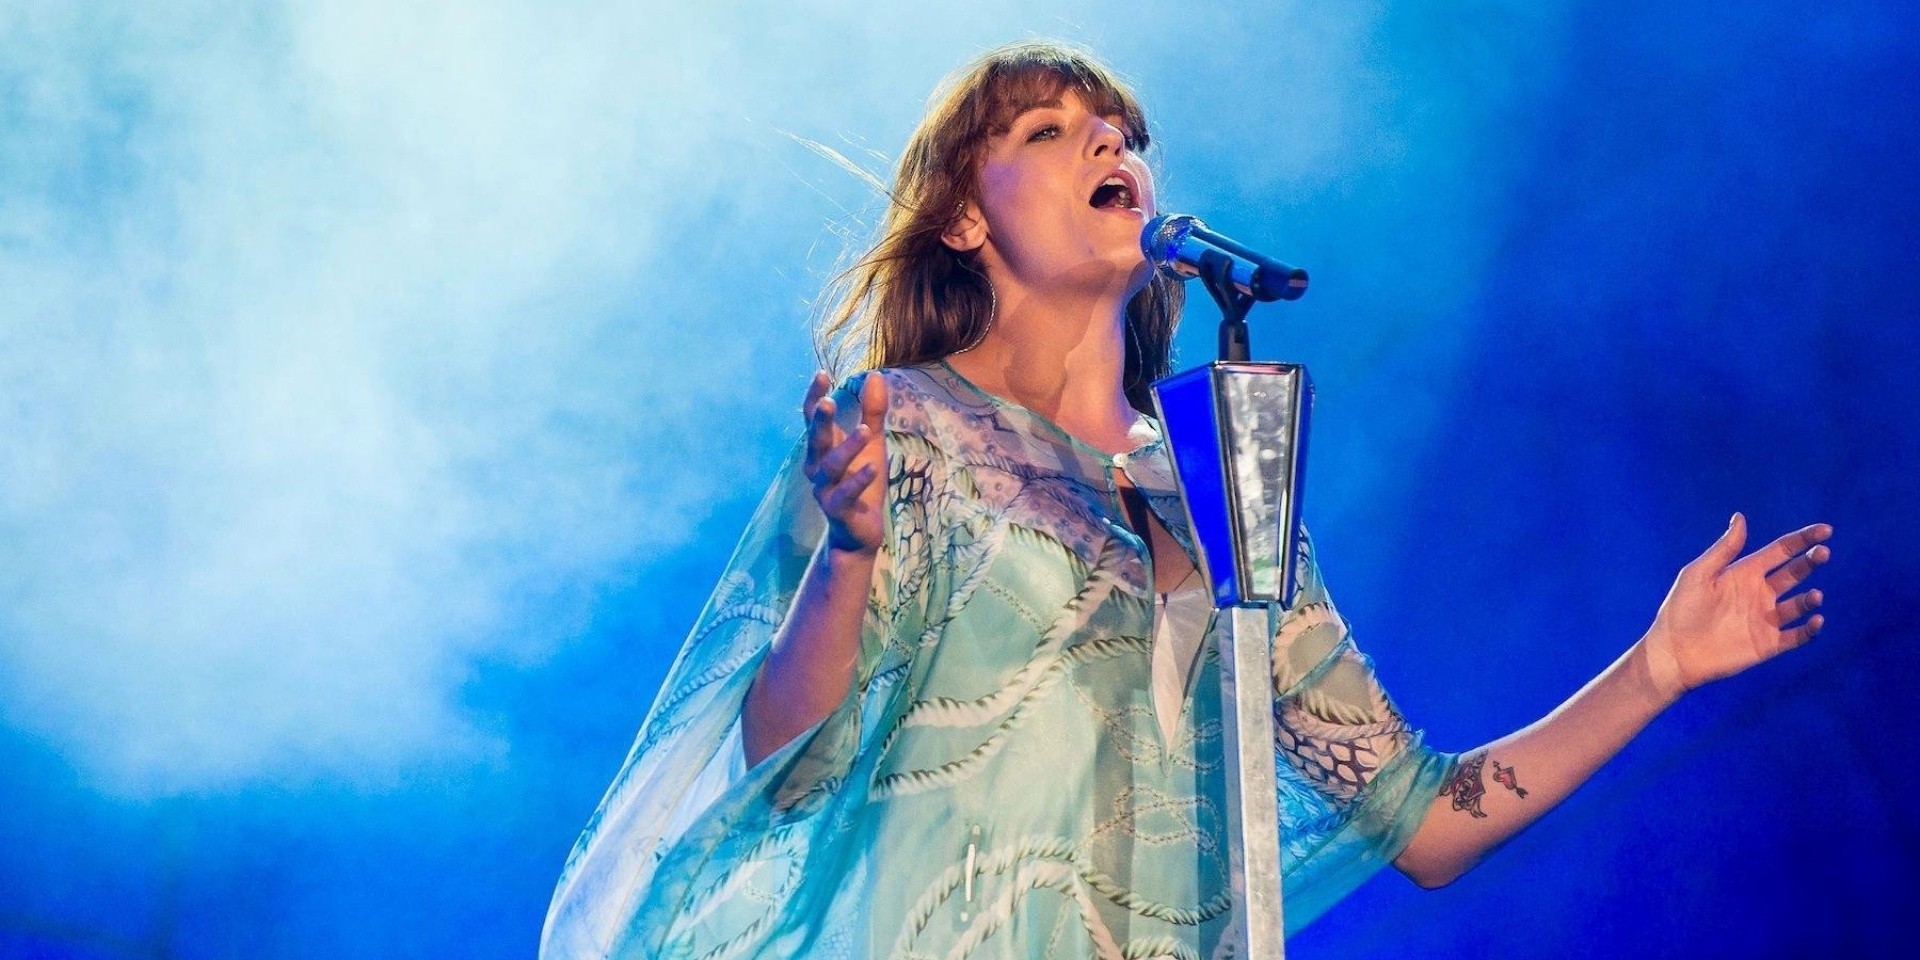 Florence + The Machine shares unreleased track on tour – watch